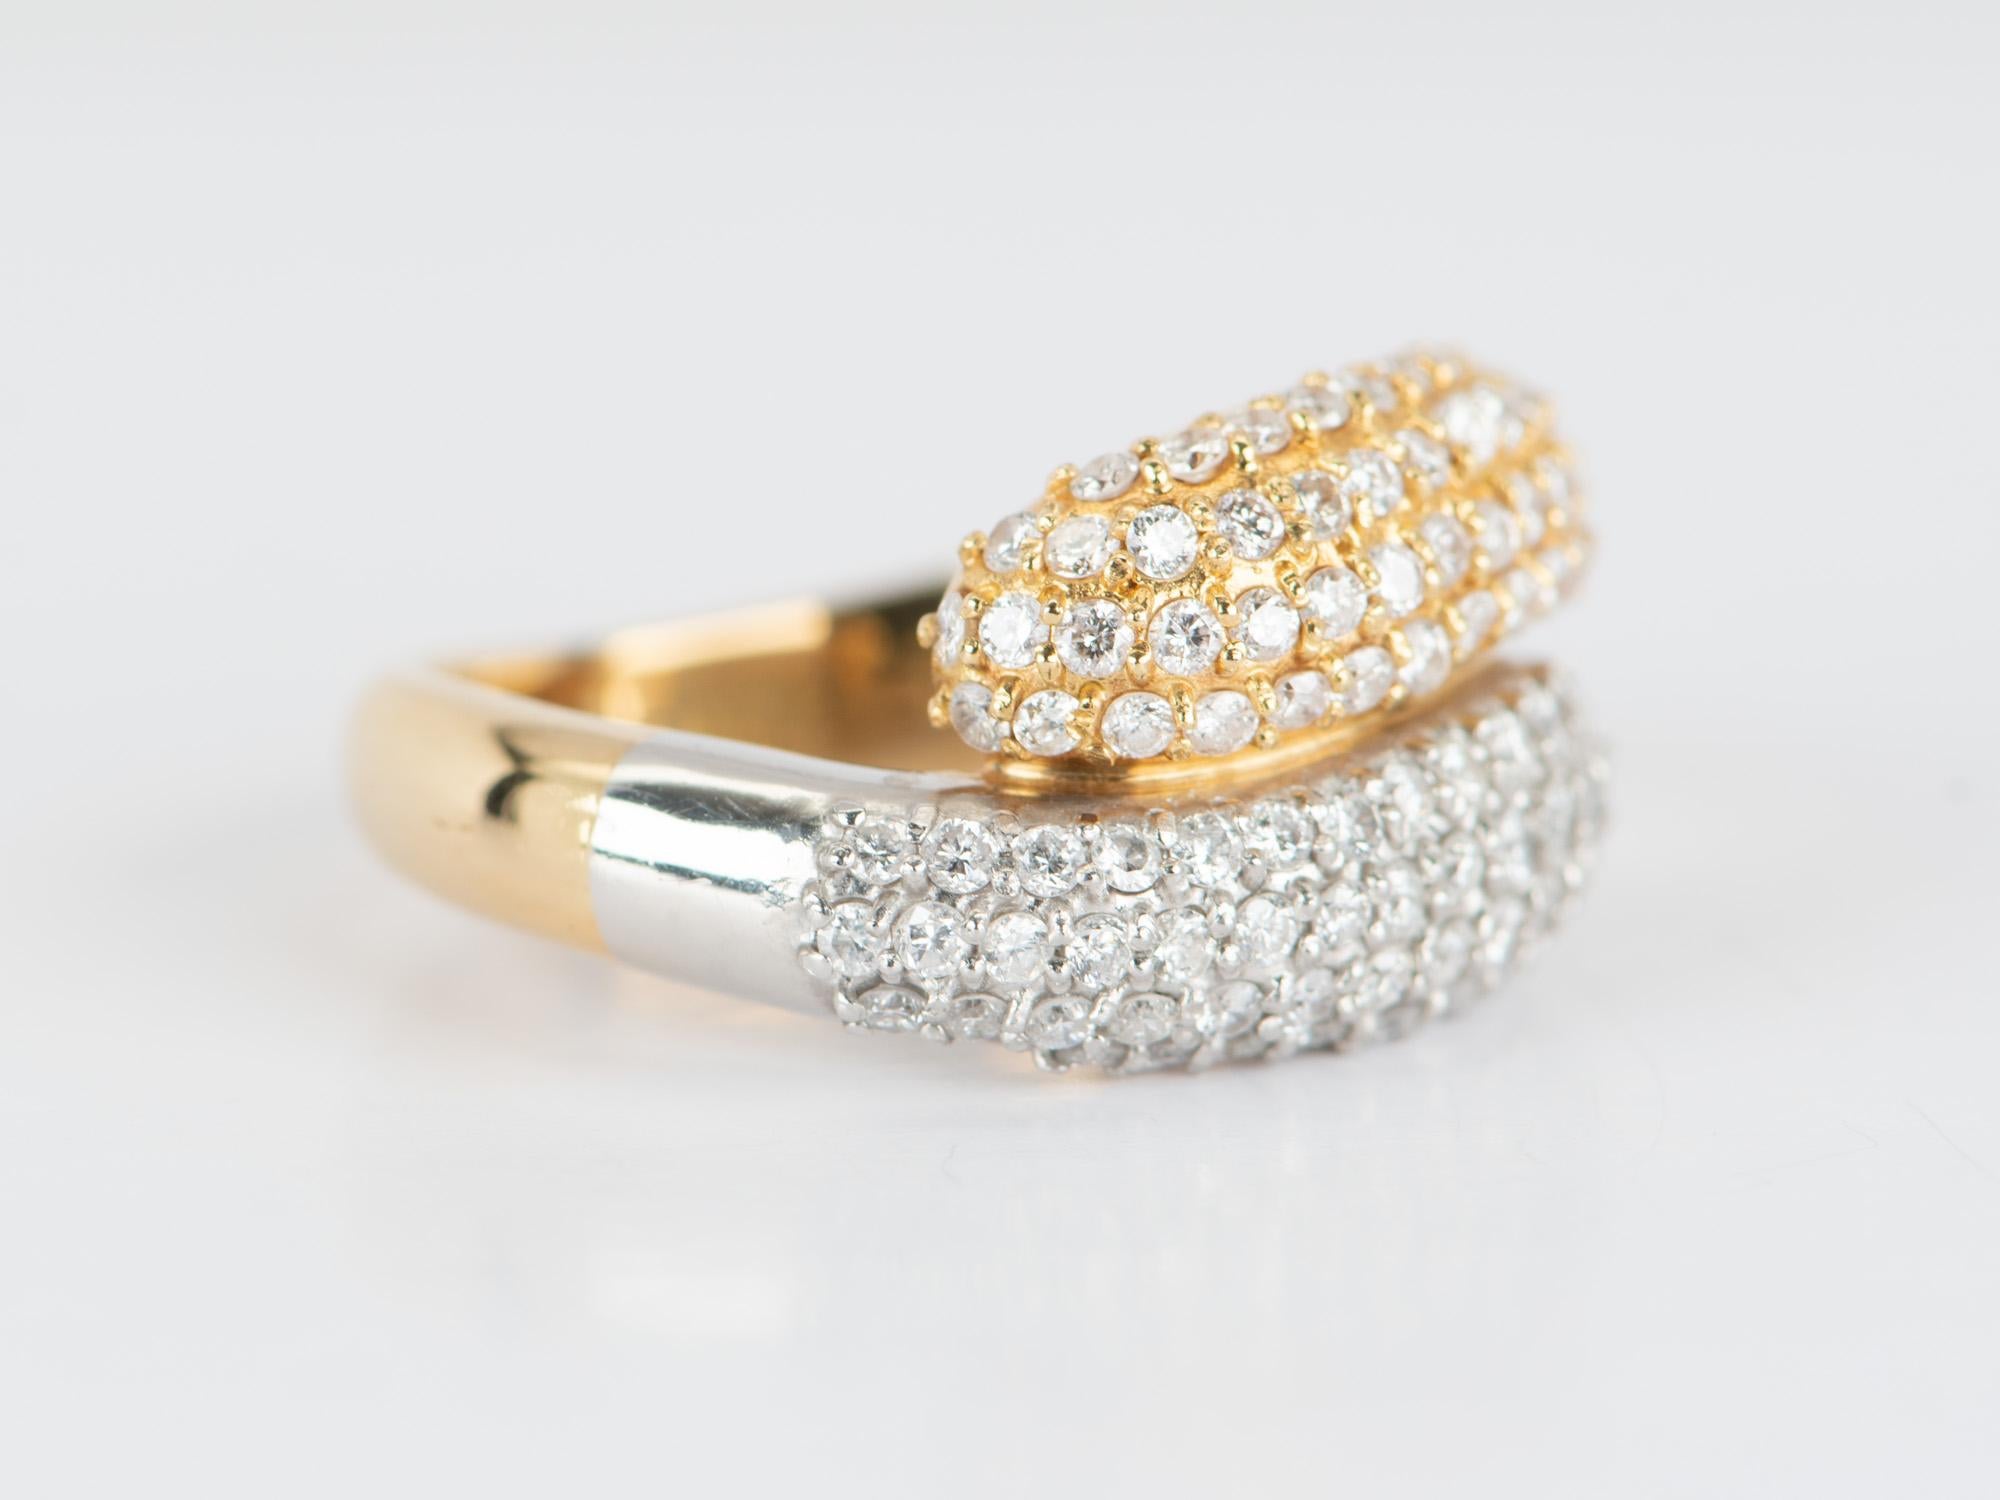 18K Gold & PT950 Diamond Pave Double Head Snake Ring 8.7g 1ct Diamond R6651 In New Condition For Sale In Osprey, FL